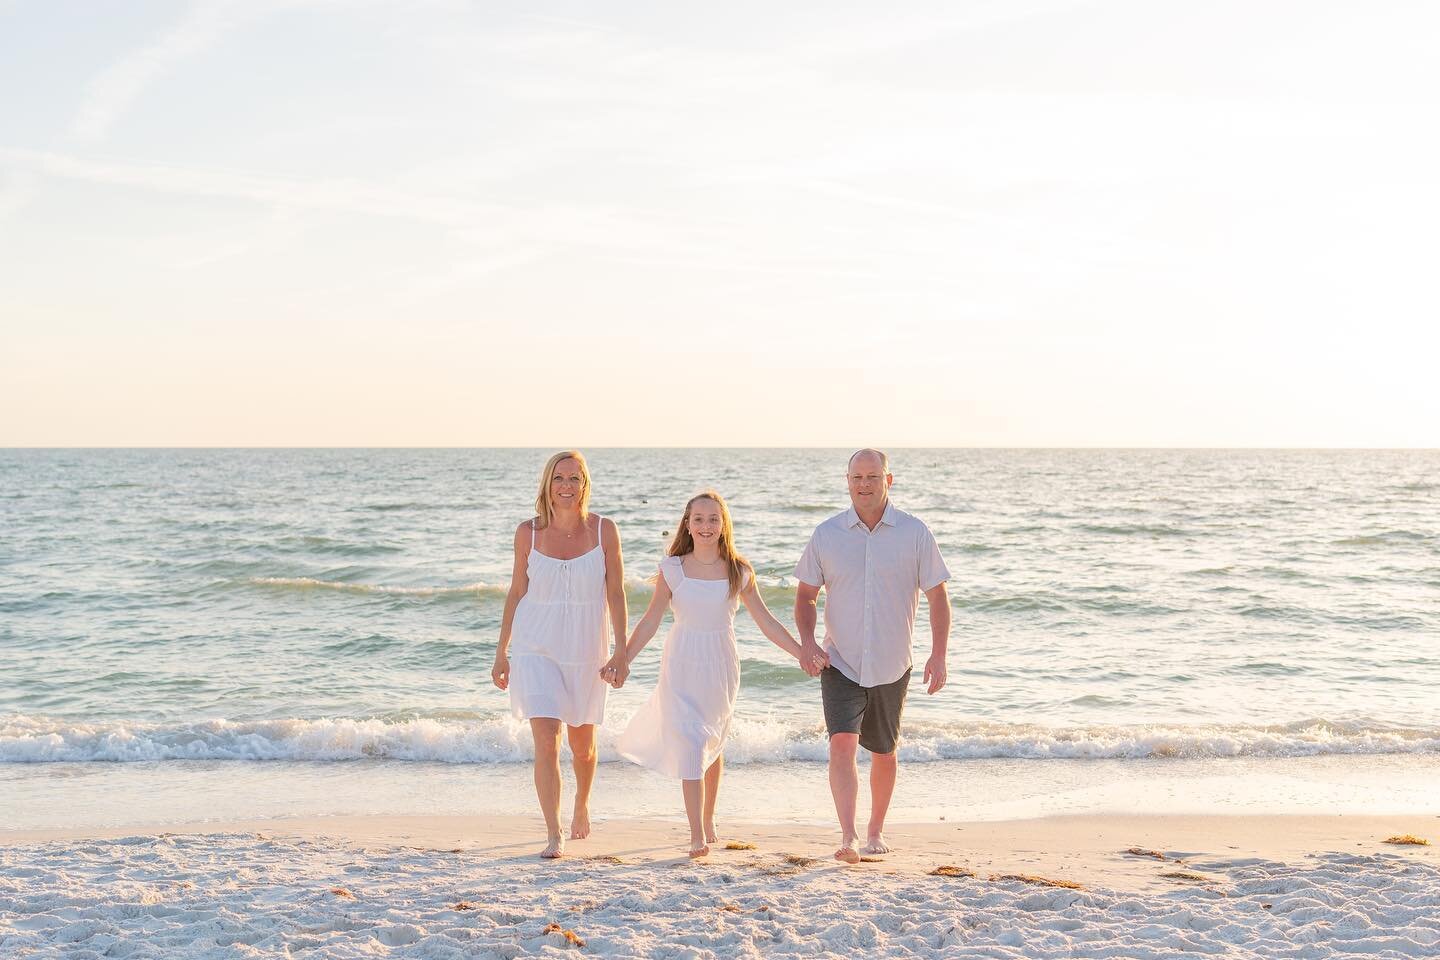 One of my number one goals during your session is to keep it fun and light-hearted.

I currently have Wednesday March 6th available for a sunset session on St Pete Beach. Text me to book (724) 771-4372

#stpetersburg #stpetebeach #family #familyphoto